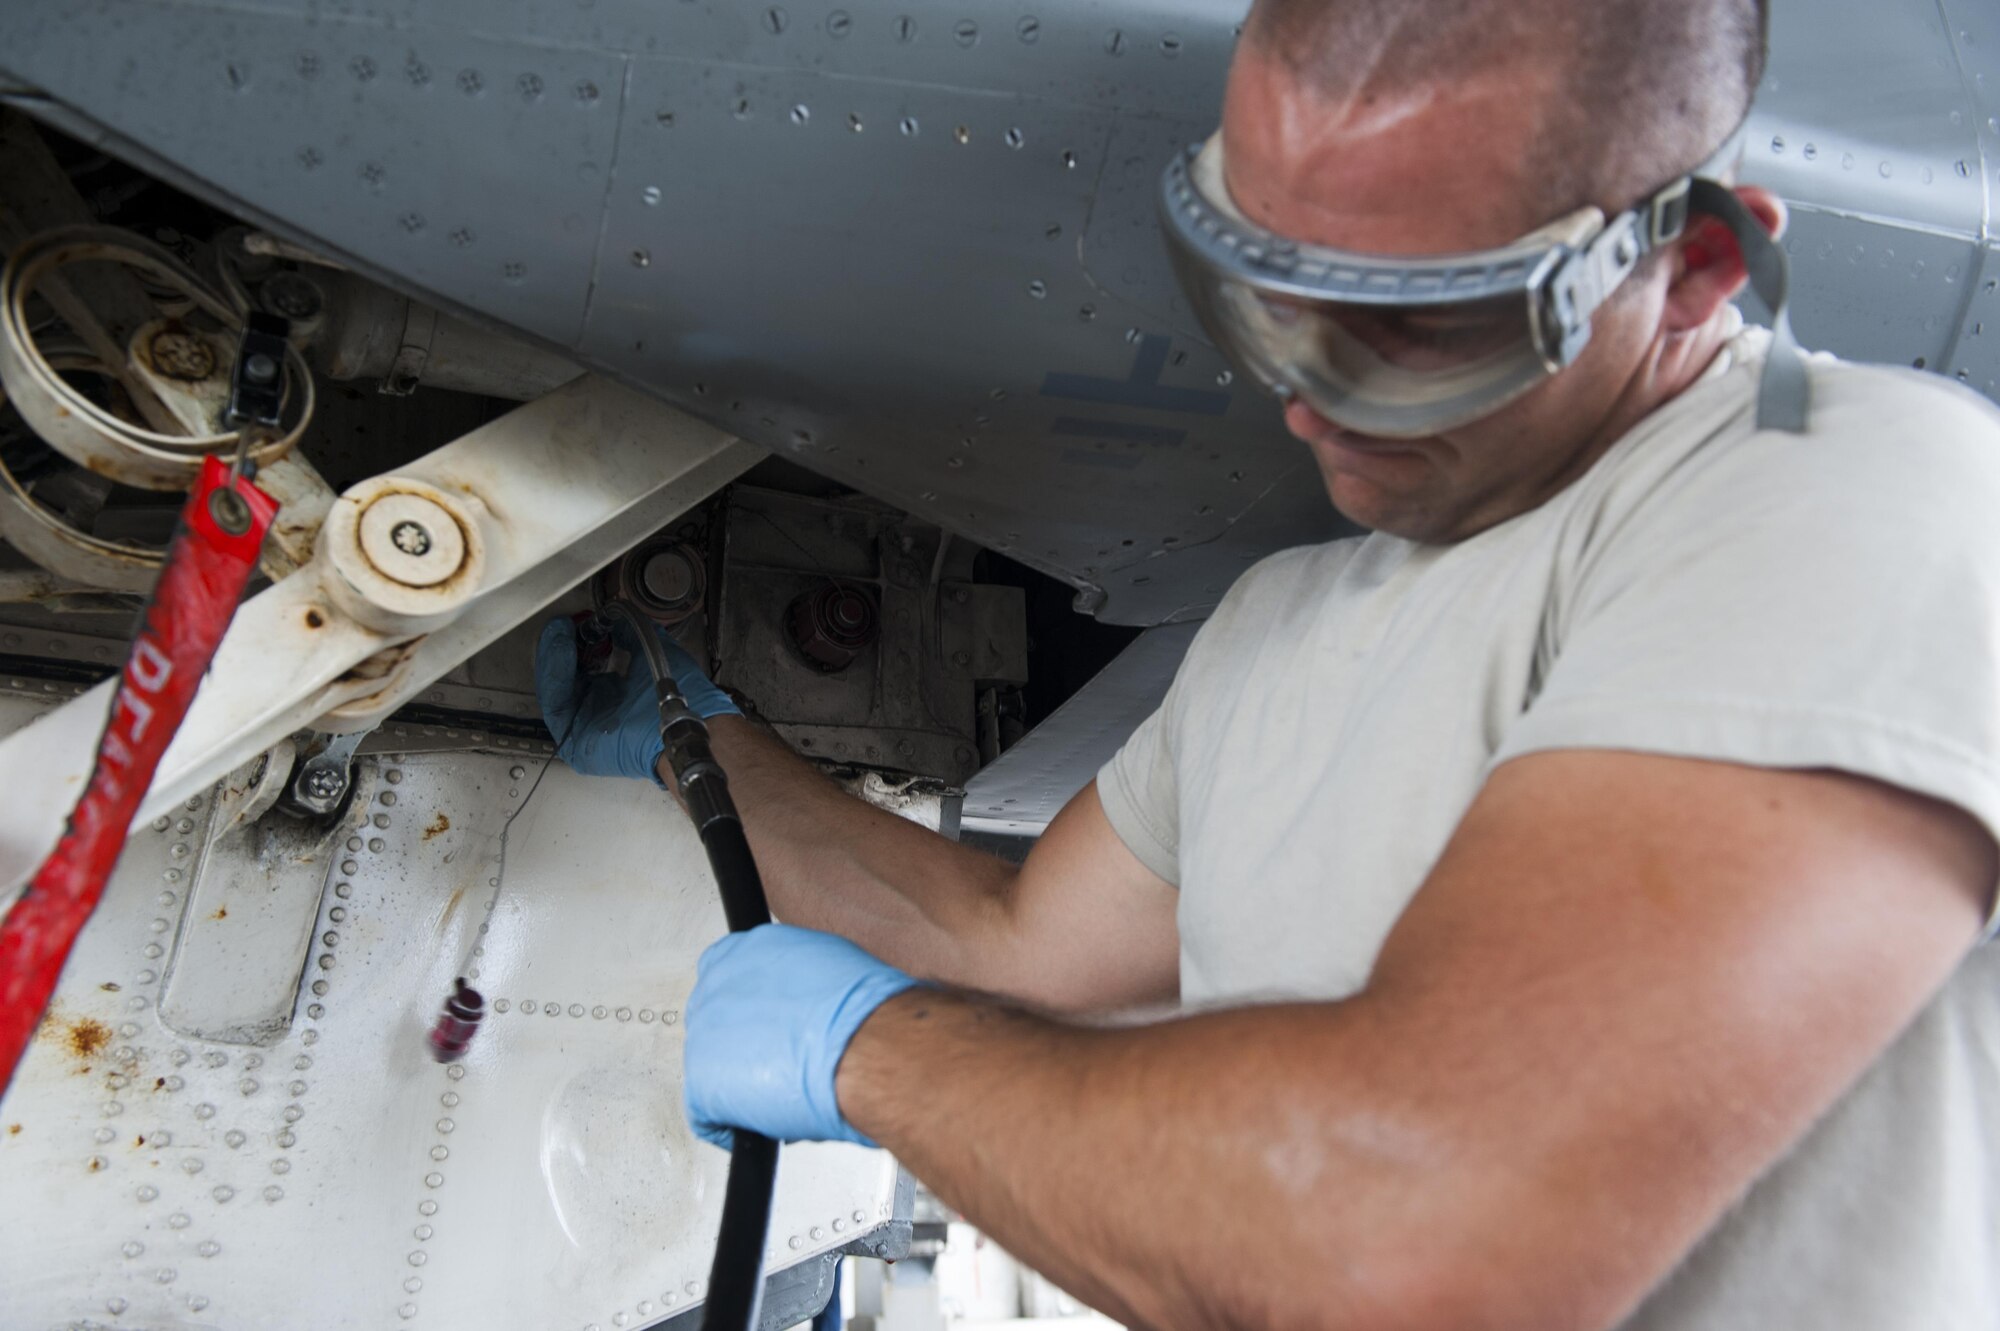 U.S. Air Force Senior Airman Devon Powell, 44th Aircraft Maintenance Unit dedicated crew chief, performs routine servicing on his F-15C Eagle, April 26, 2016, at Kadena Air Base Japan. As a dedicated crew chief Powell is assigned to an F-15C and is responsible for the day-to-day maintenance to ensure the fighter is ready at all times. (U.S. Air Force photo by Airman Zackary A. Henry)